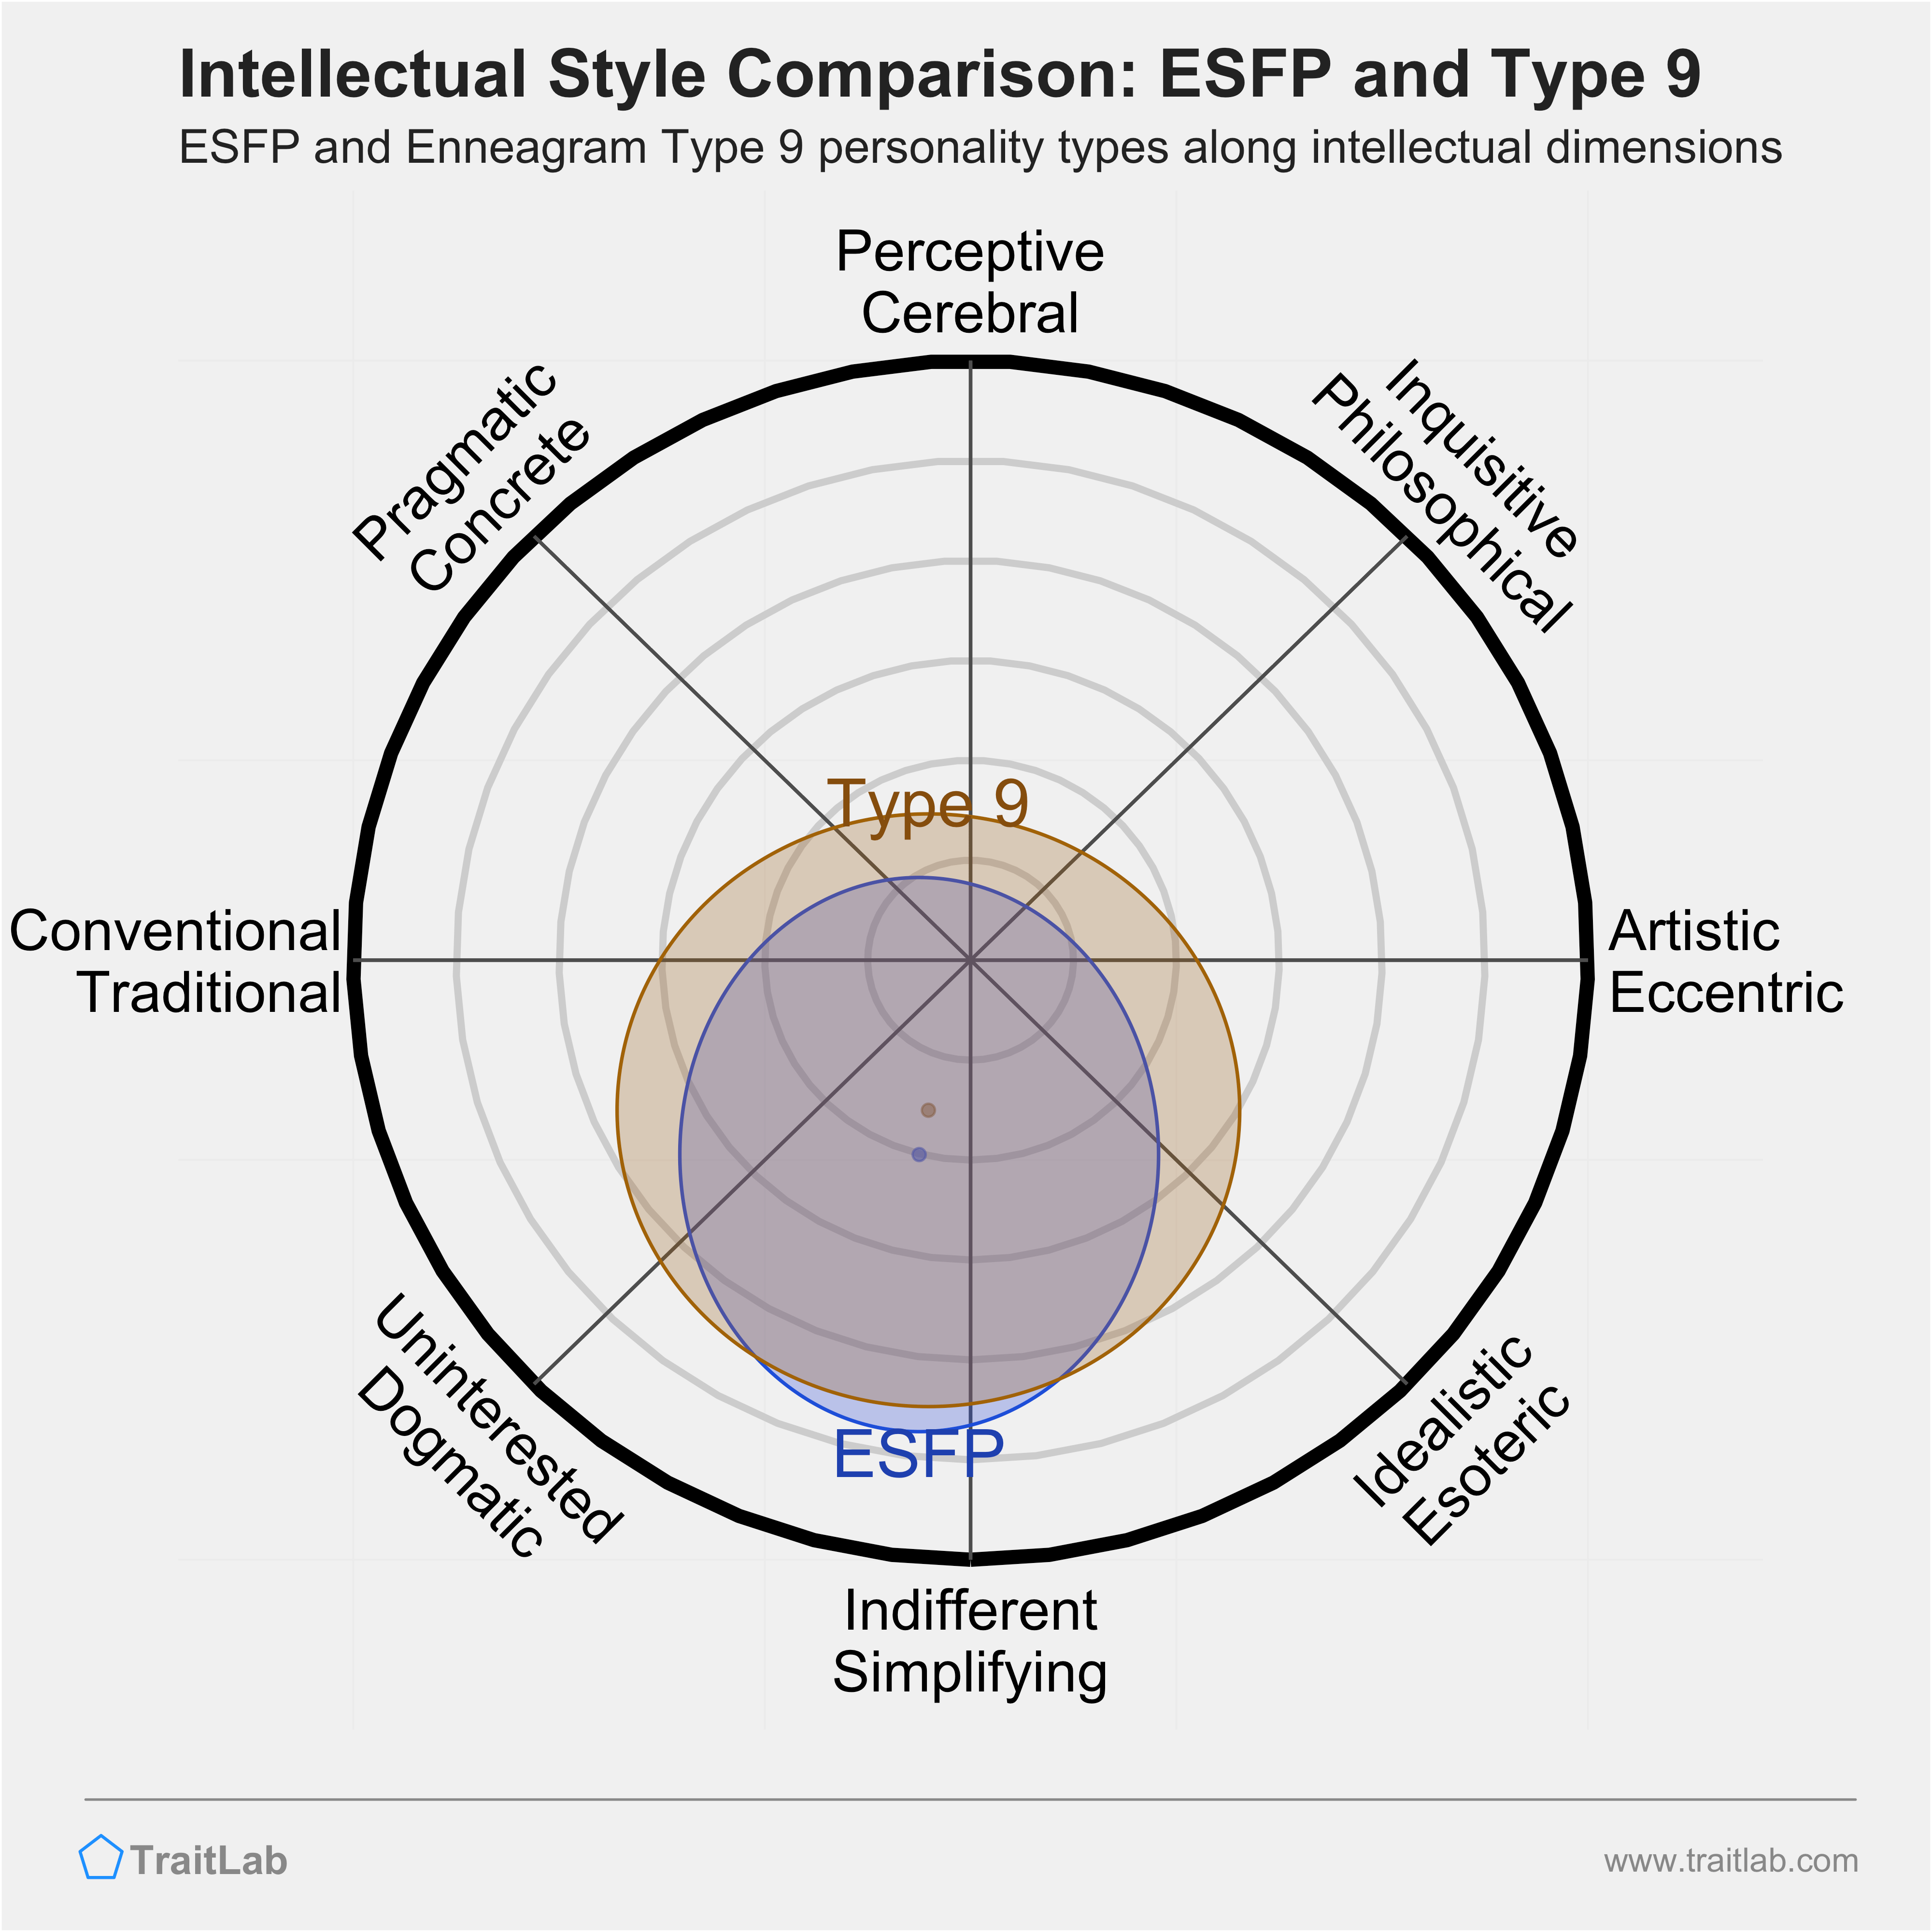 ESFP and Type 9 comparison across intellectual dimensions